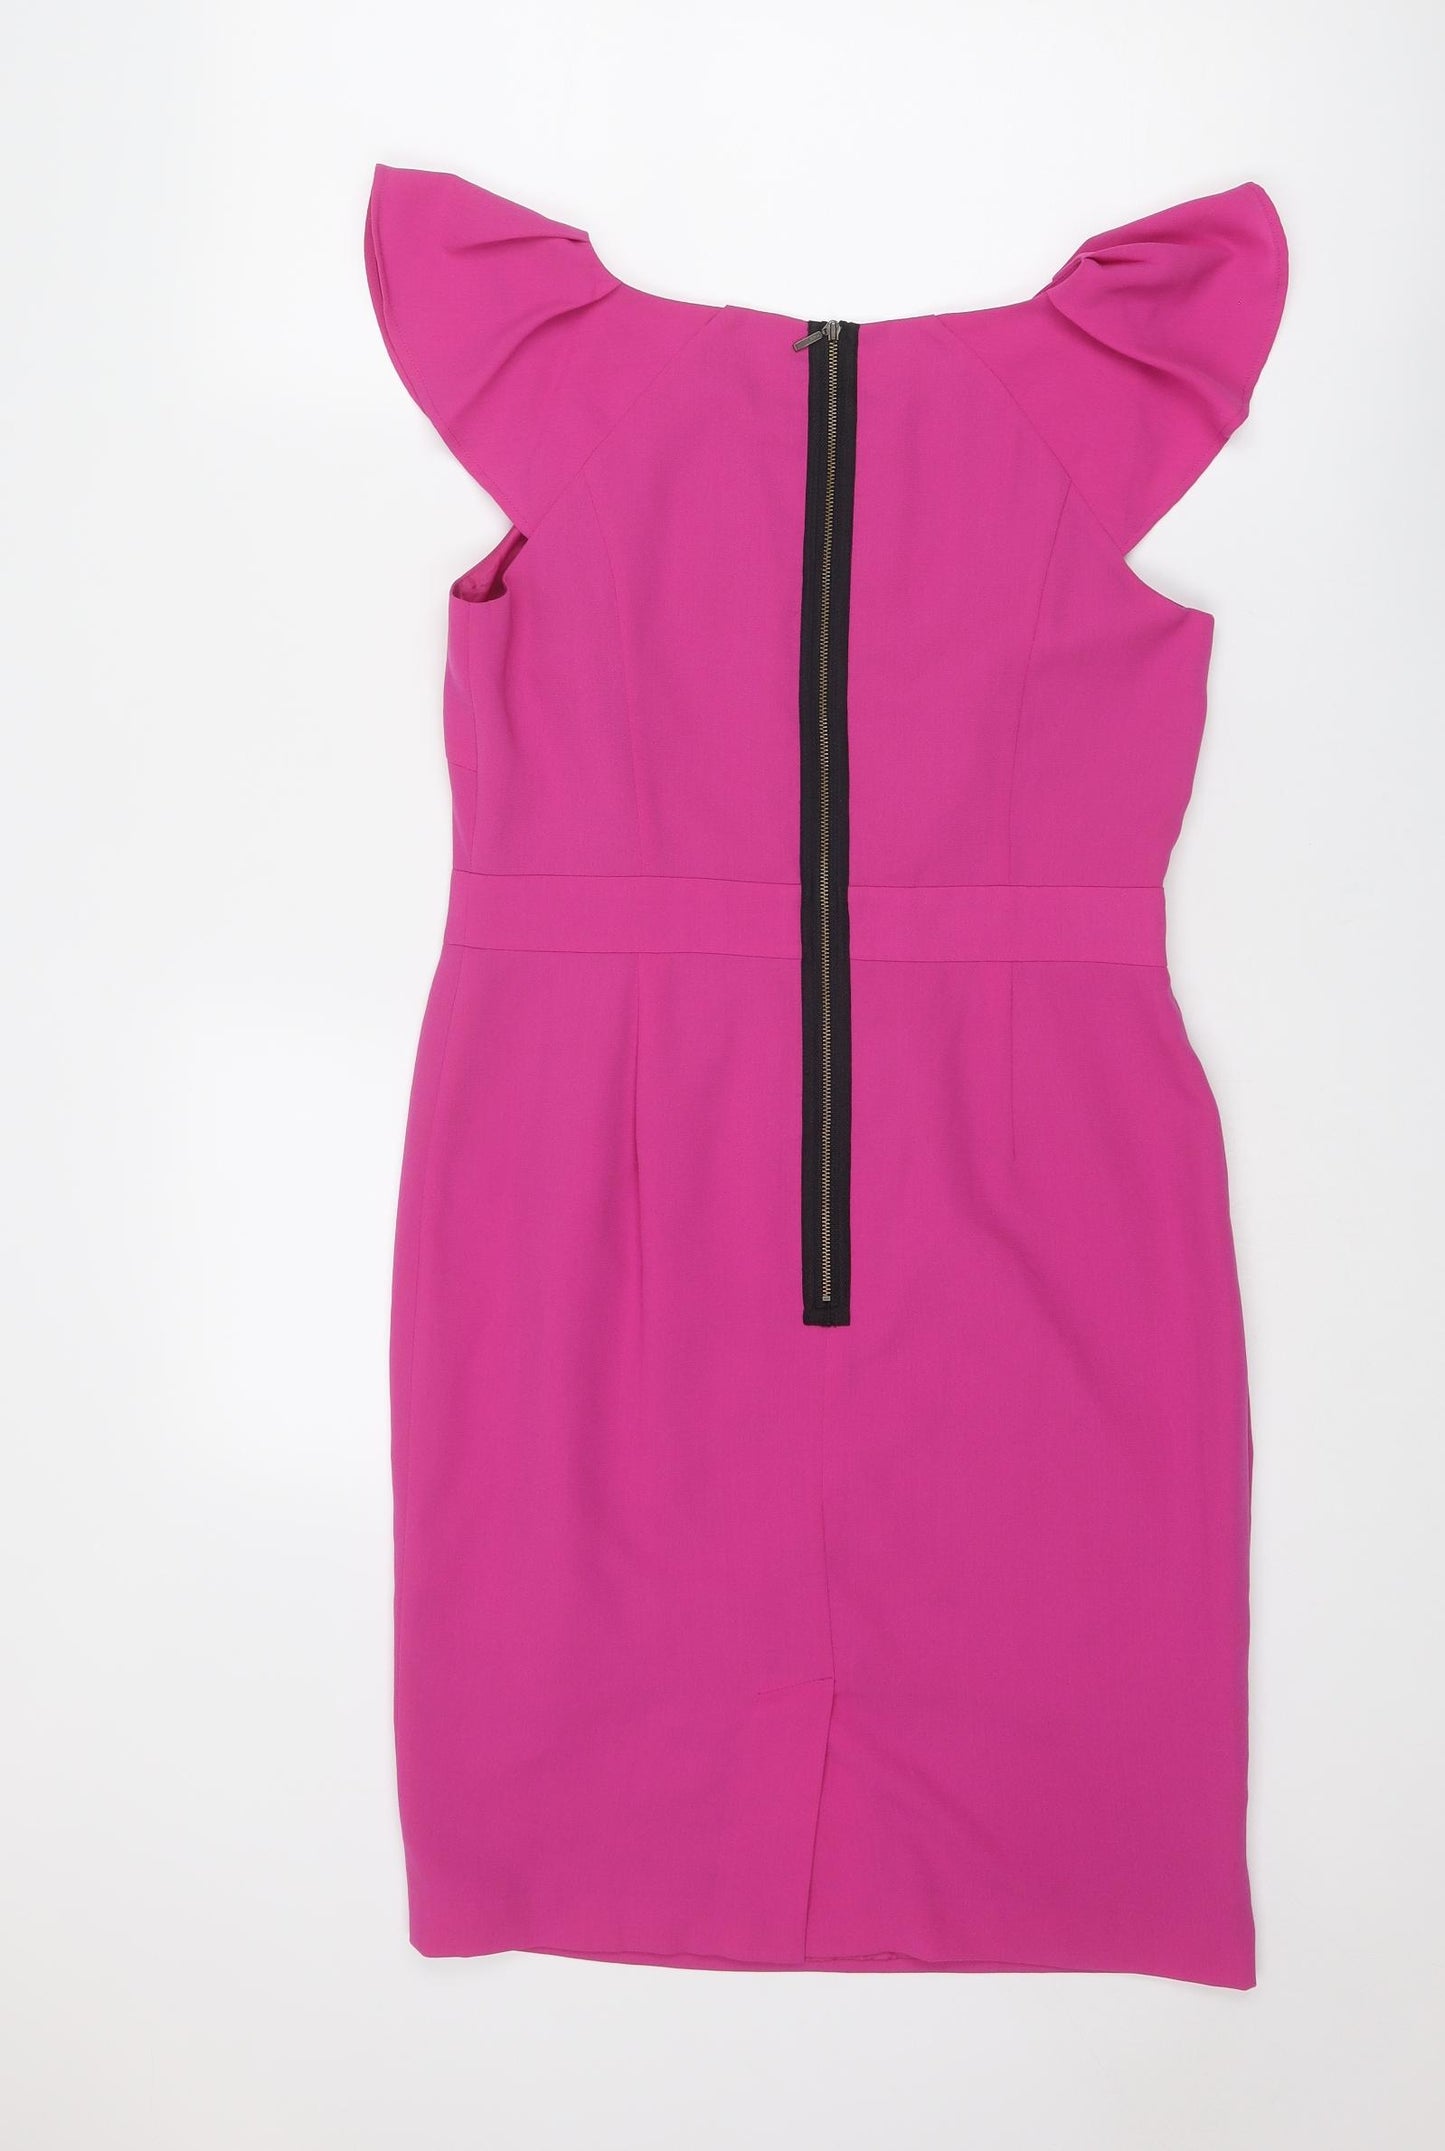 Marks and Spencer Womens Pink Polyester Shift Size 10 Boat Neck Zip